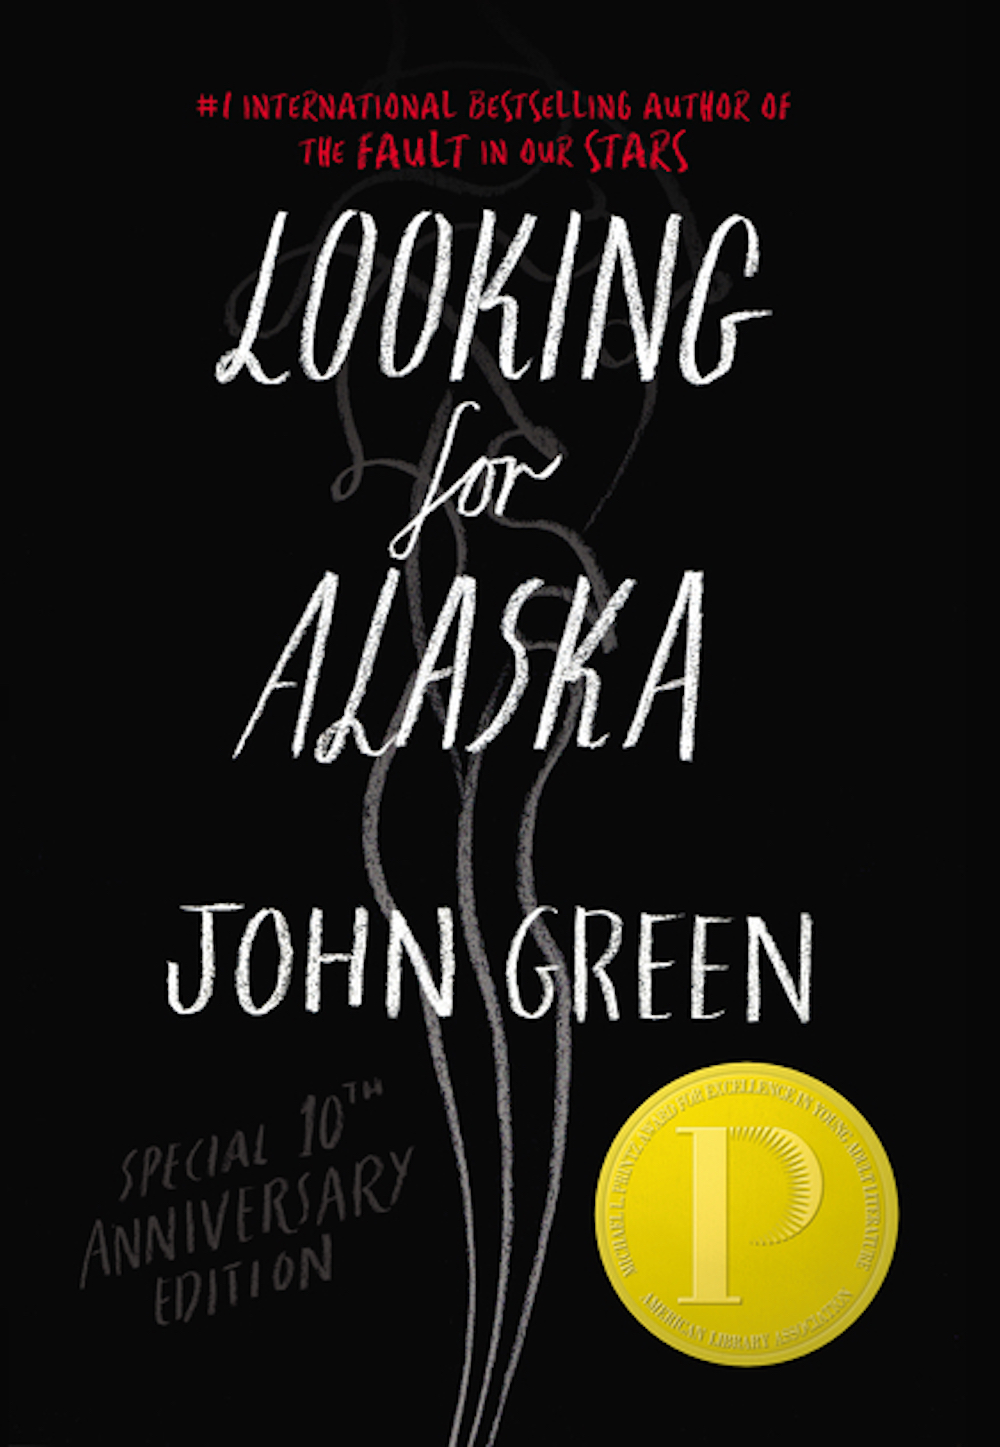 ENTITY reports on John Green books and his upcoming novel. 